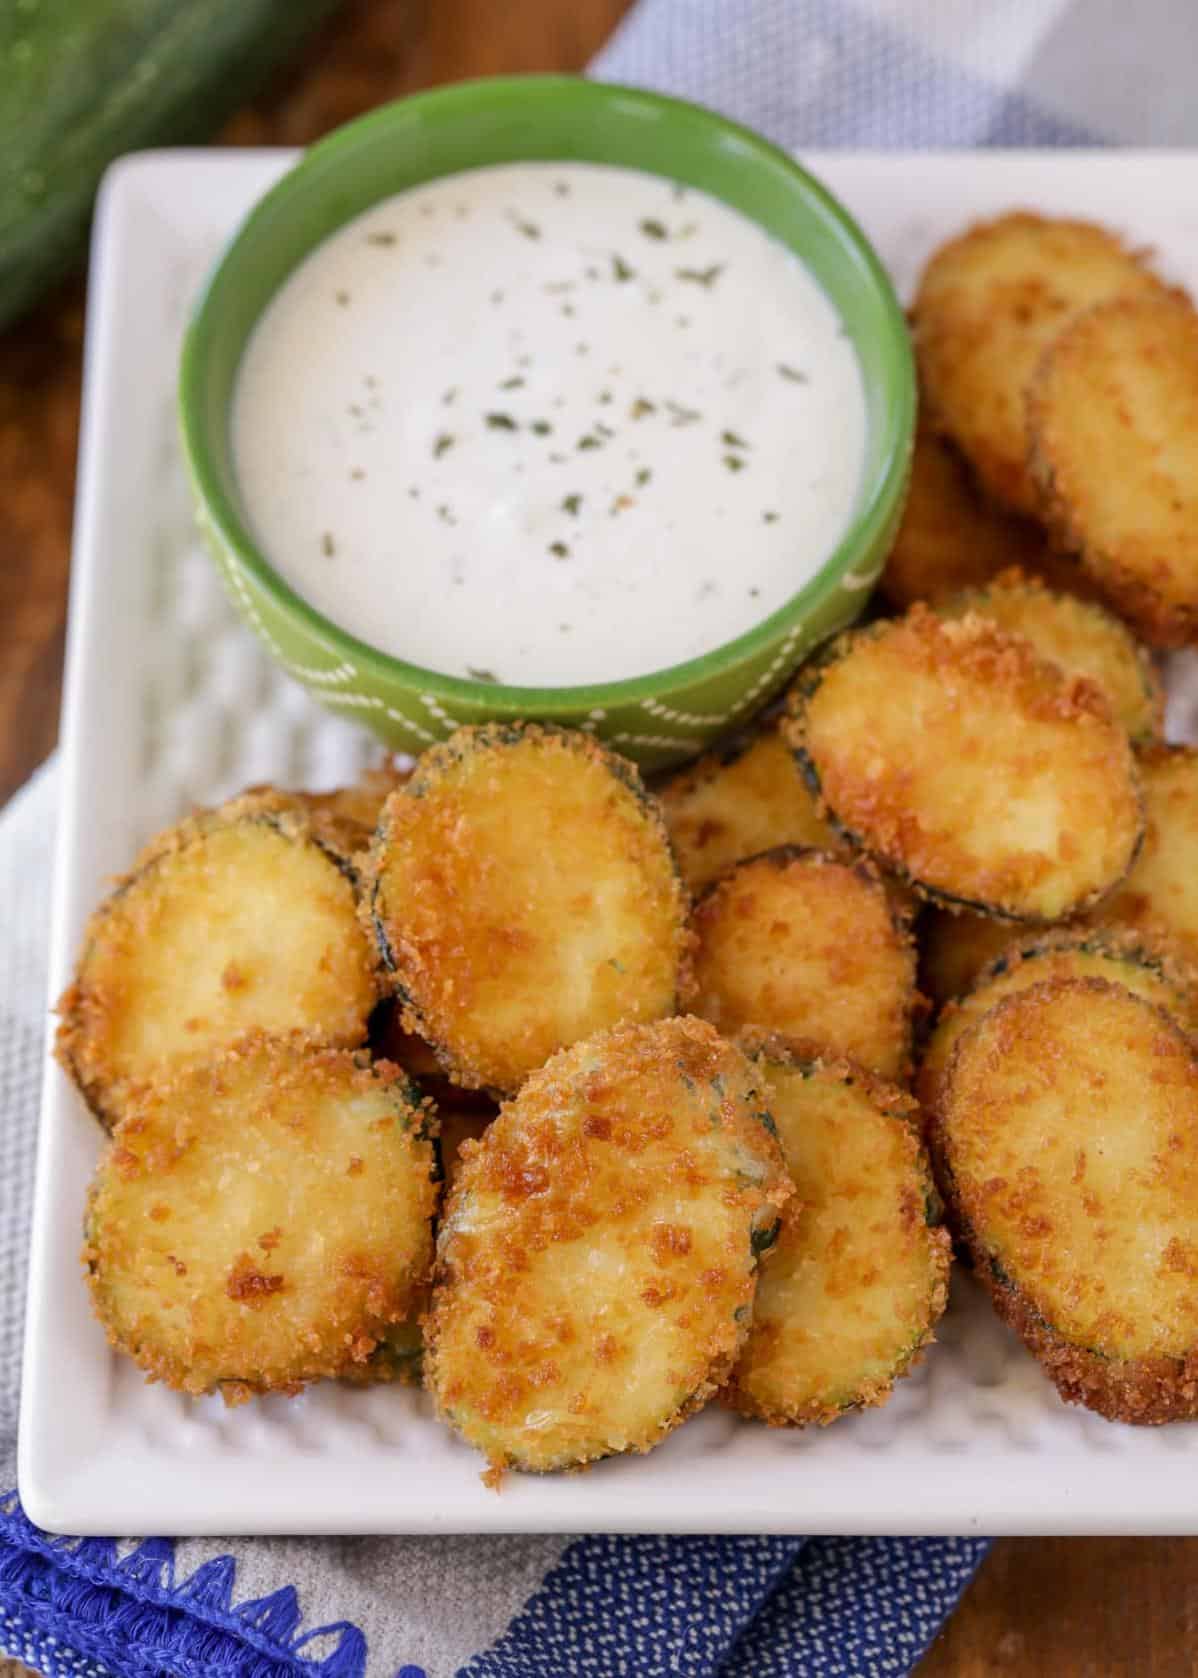  Get ready to fall in love with this crispy and flavorful fried zucchini!